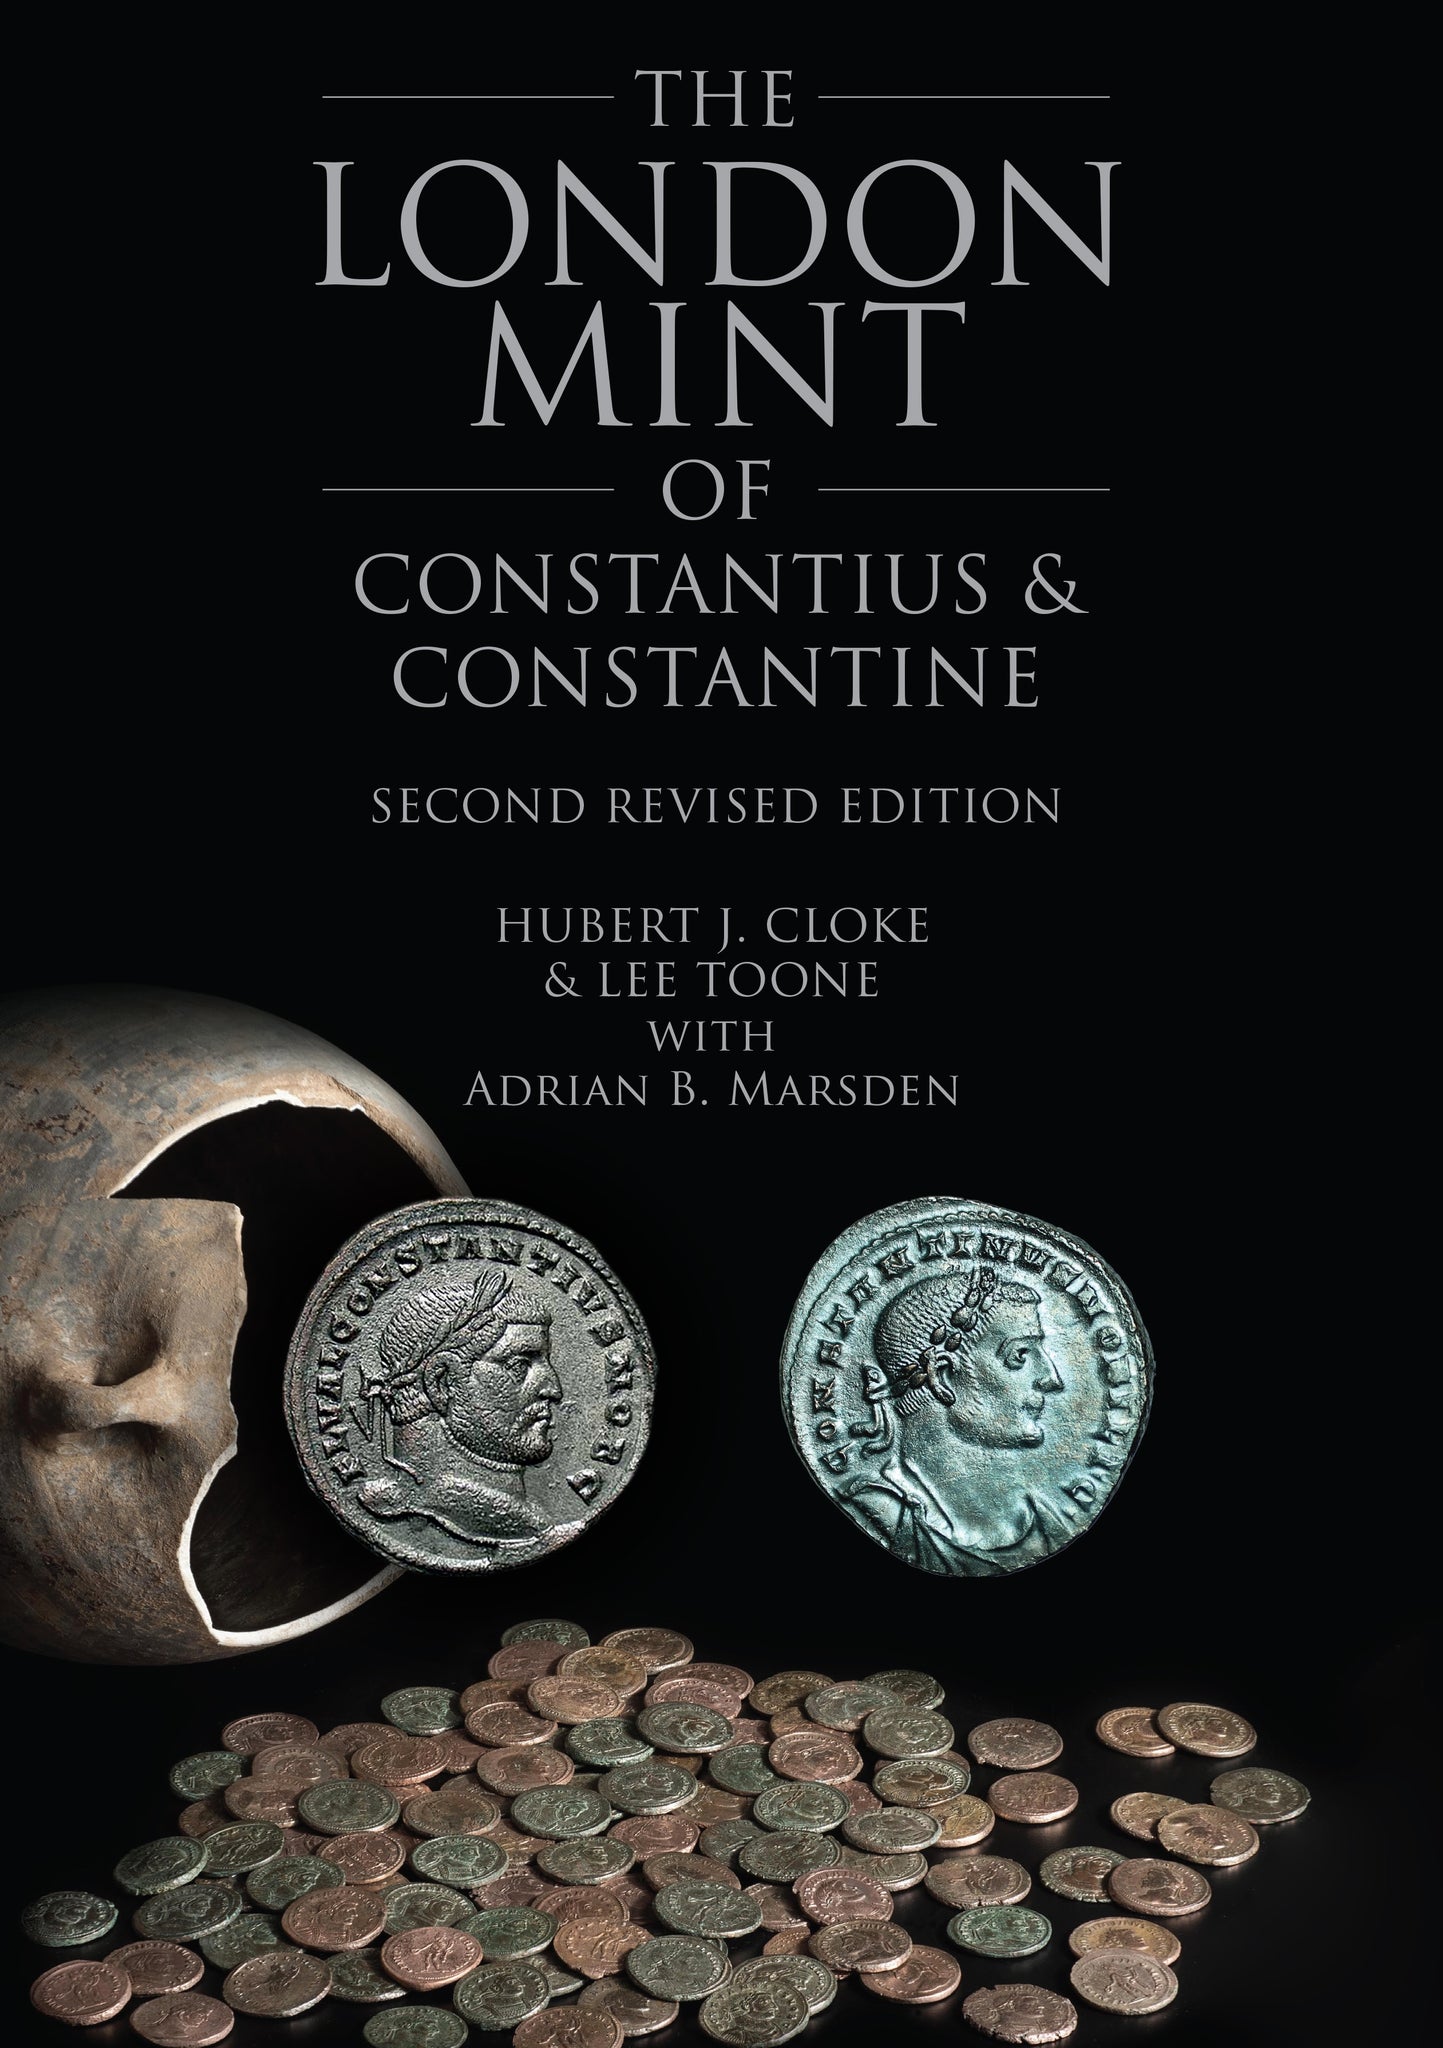 The London Mint of Constantius and Constantine, Second Edition by Hubert J Cloke and Lee Toone, with Adrian B Marsden